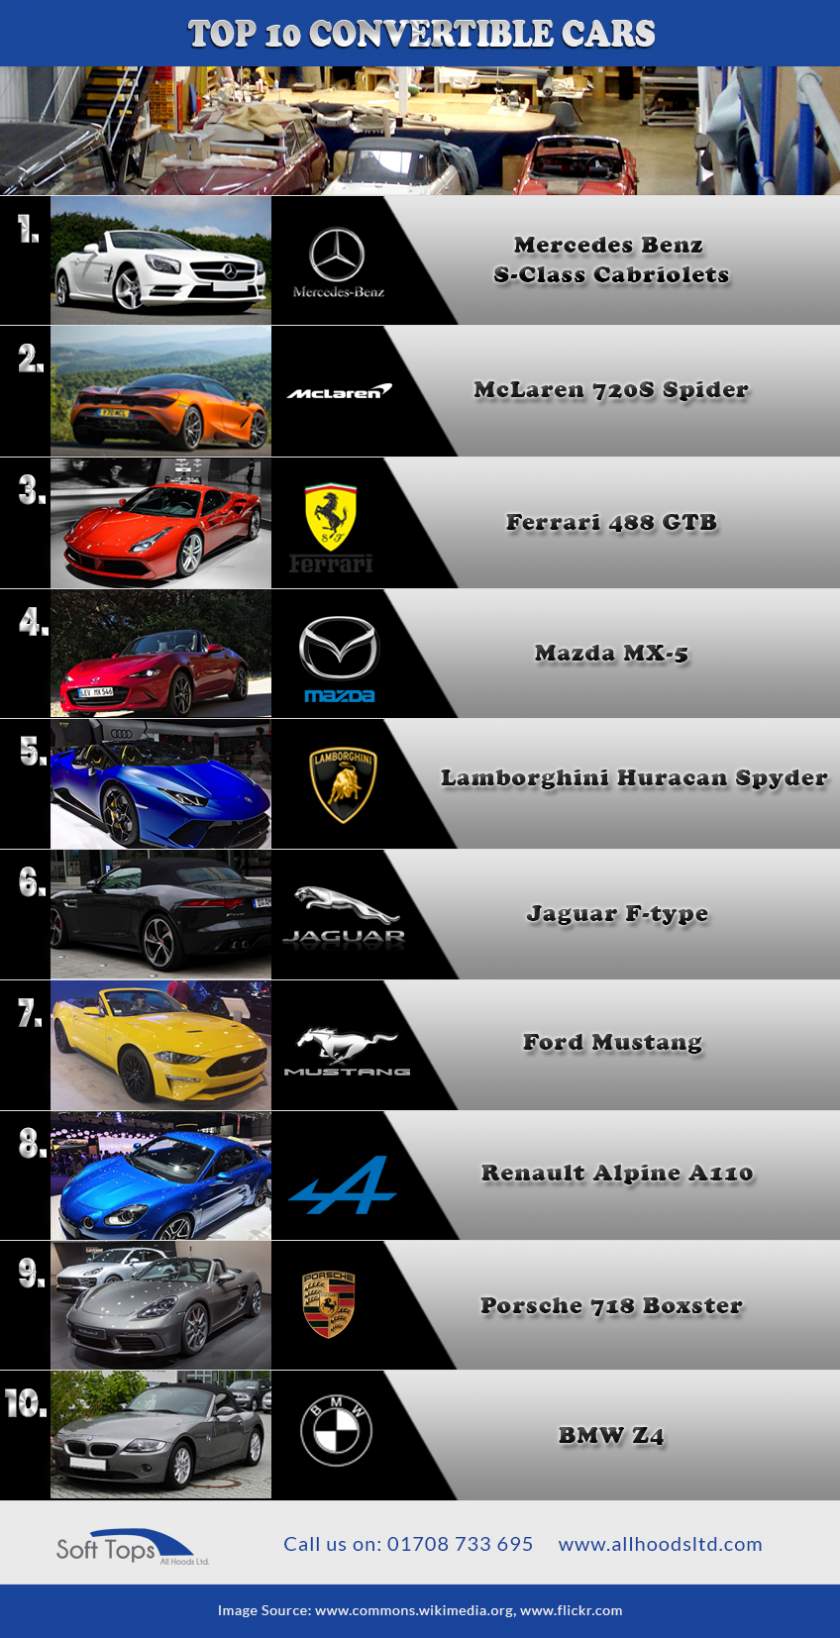 Top 10 Convertible Cars 2019 - Infographic Portal